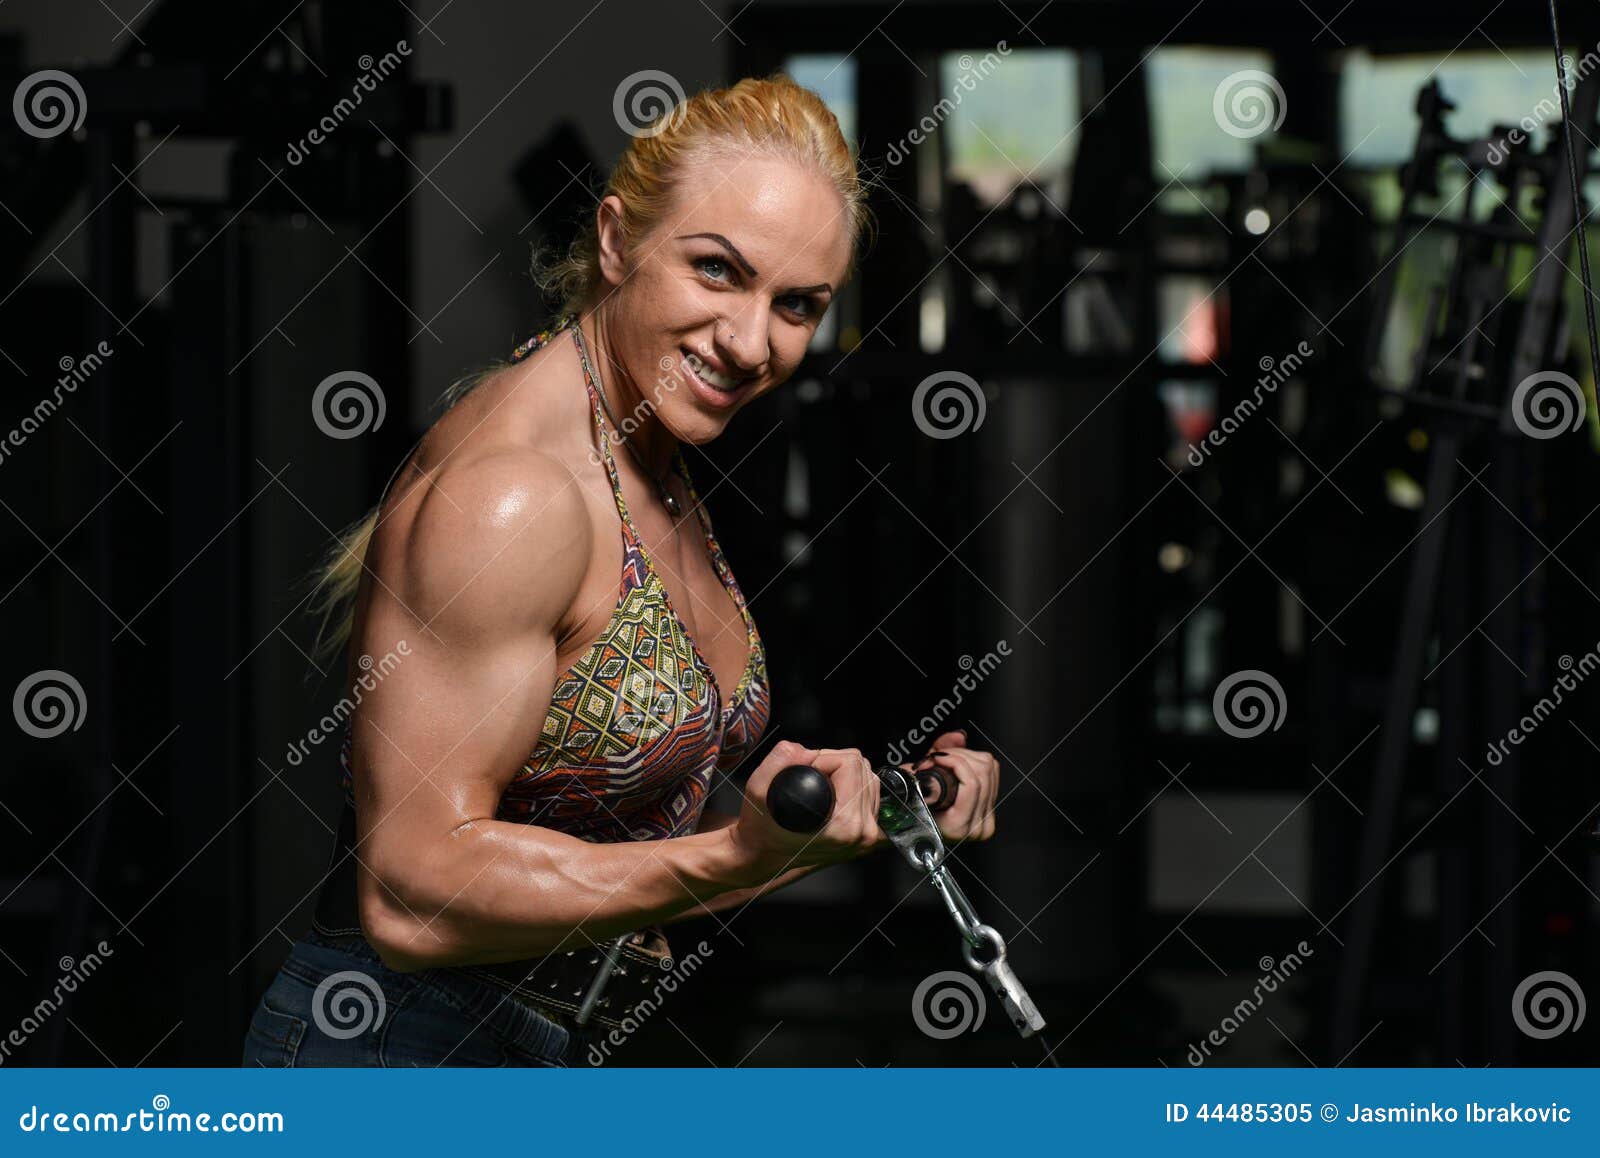 Portrait Of Young Fitness Woman Shows Biceps. Muscular Female Body